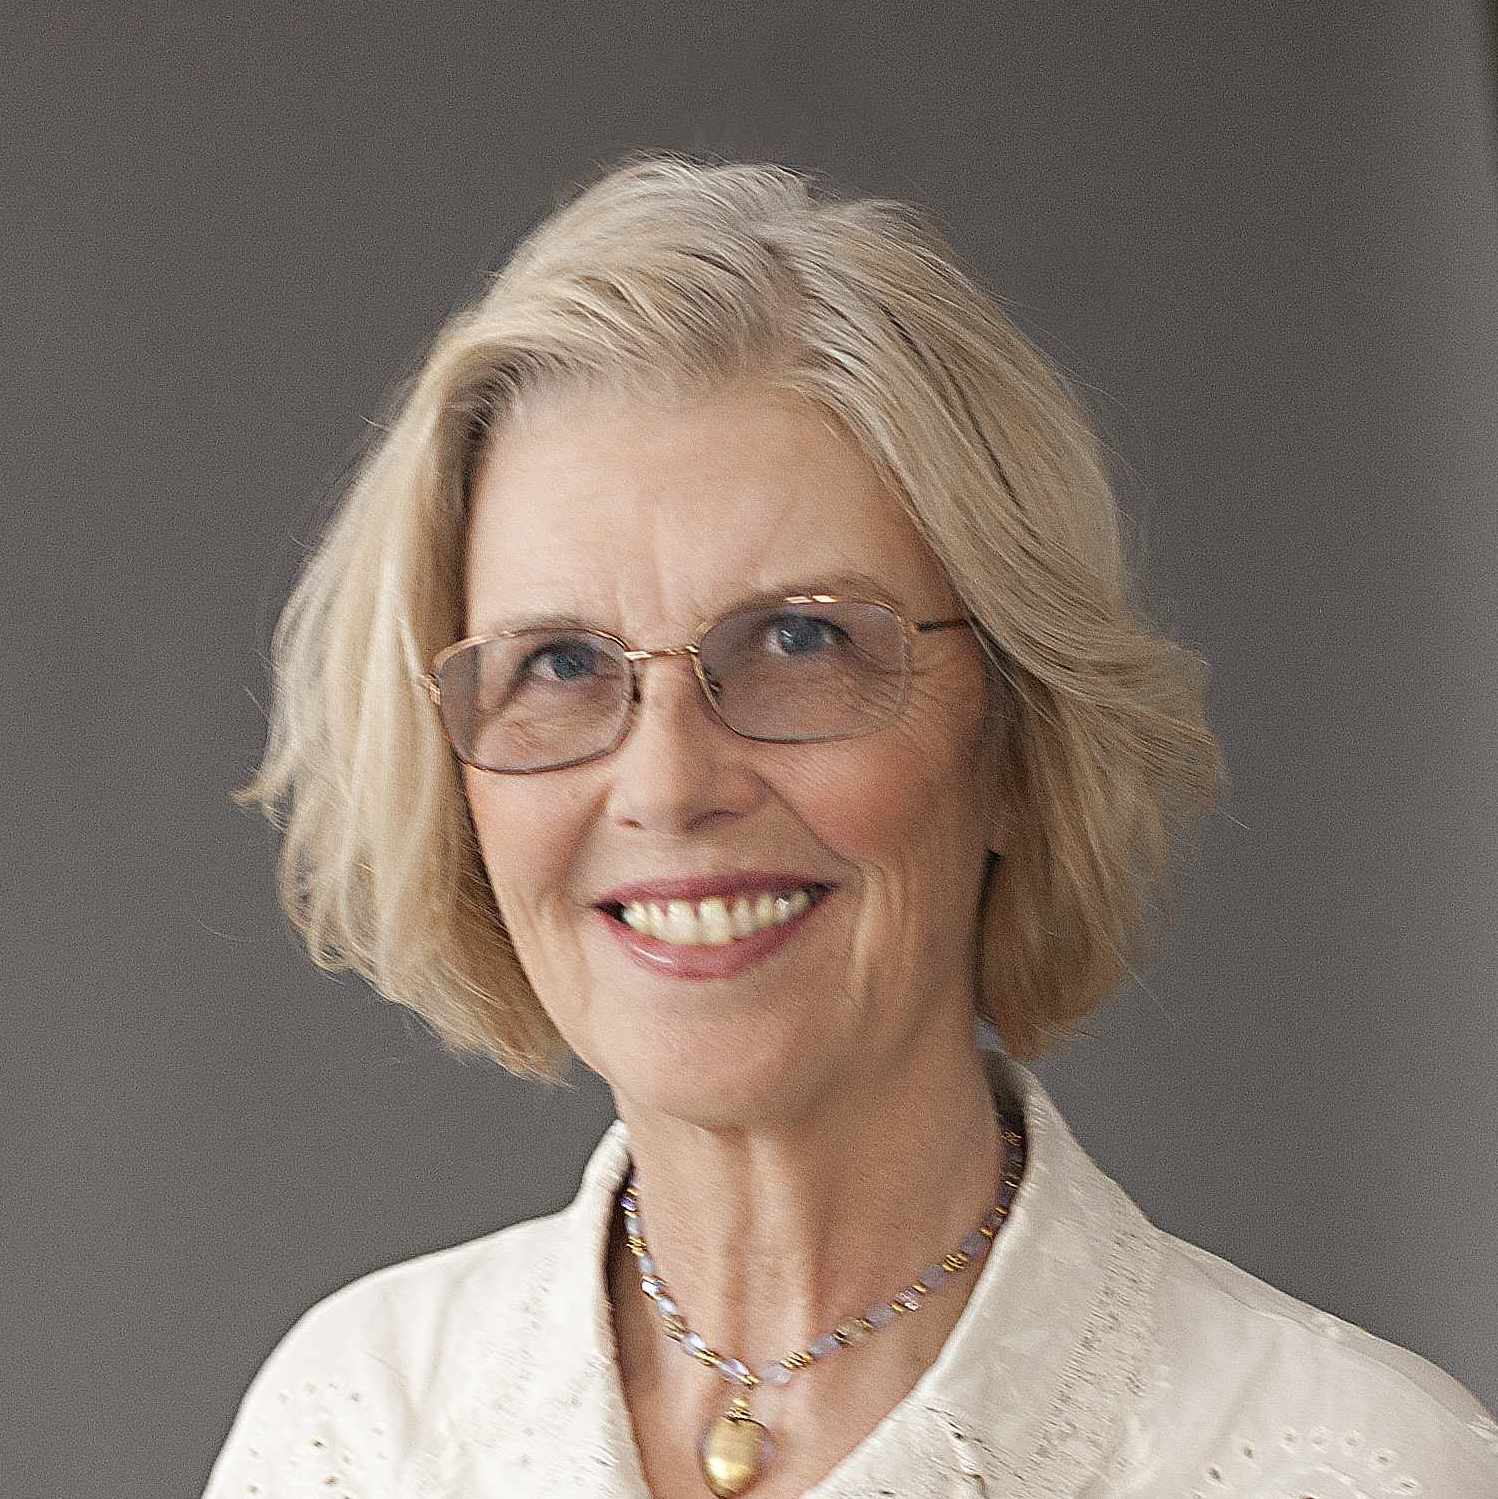 Can We Retain Empathy in the Face of Fear? | An Interview with Jane Smiley